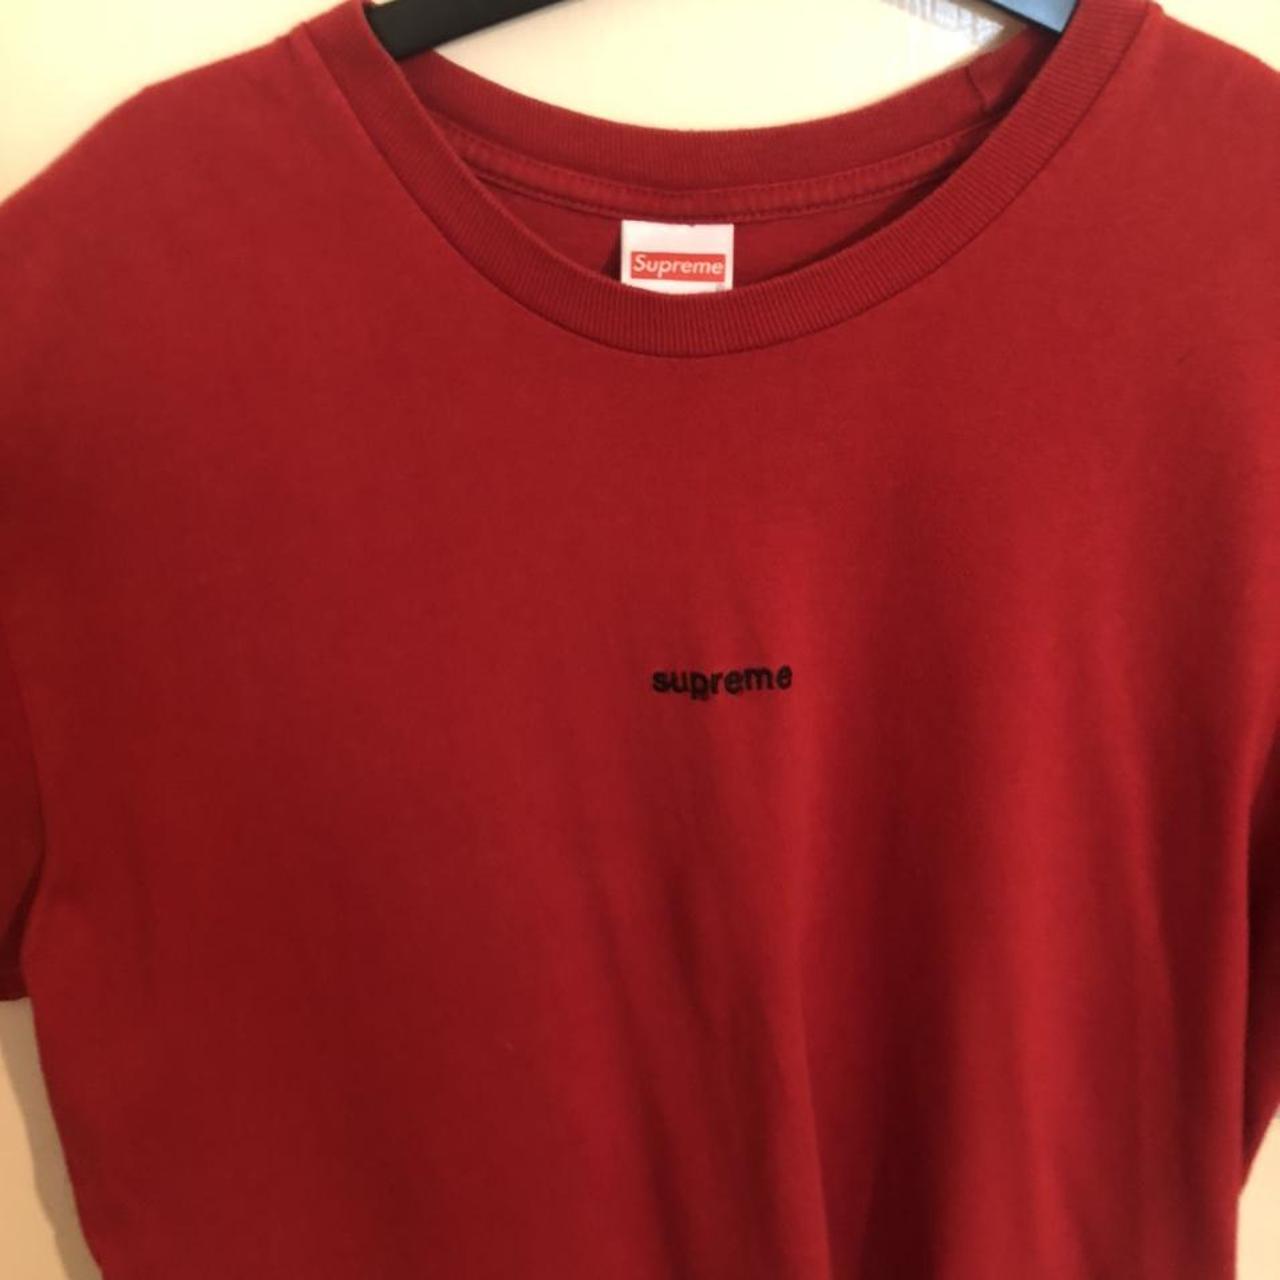 T-shirt Supreme Red size L International in Cotton - 29110729